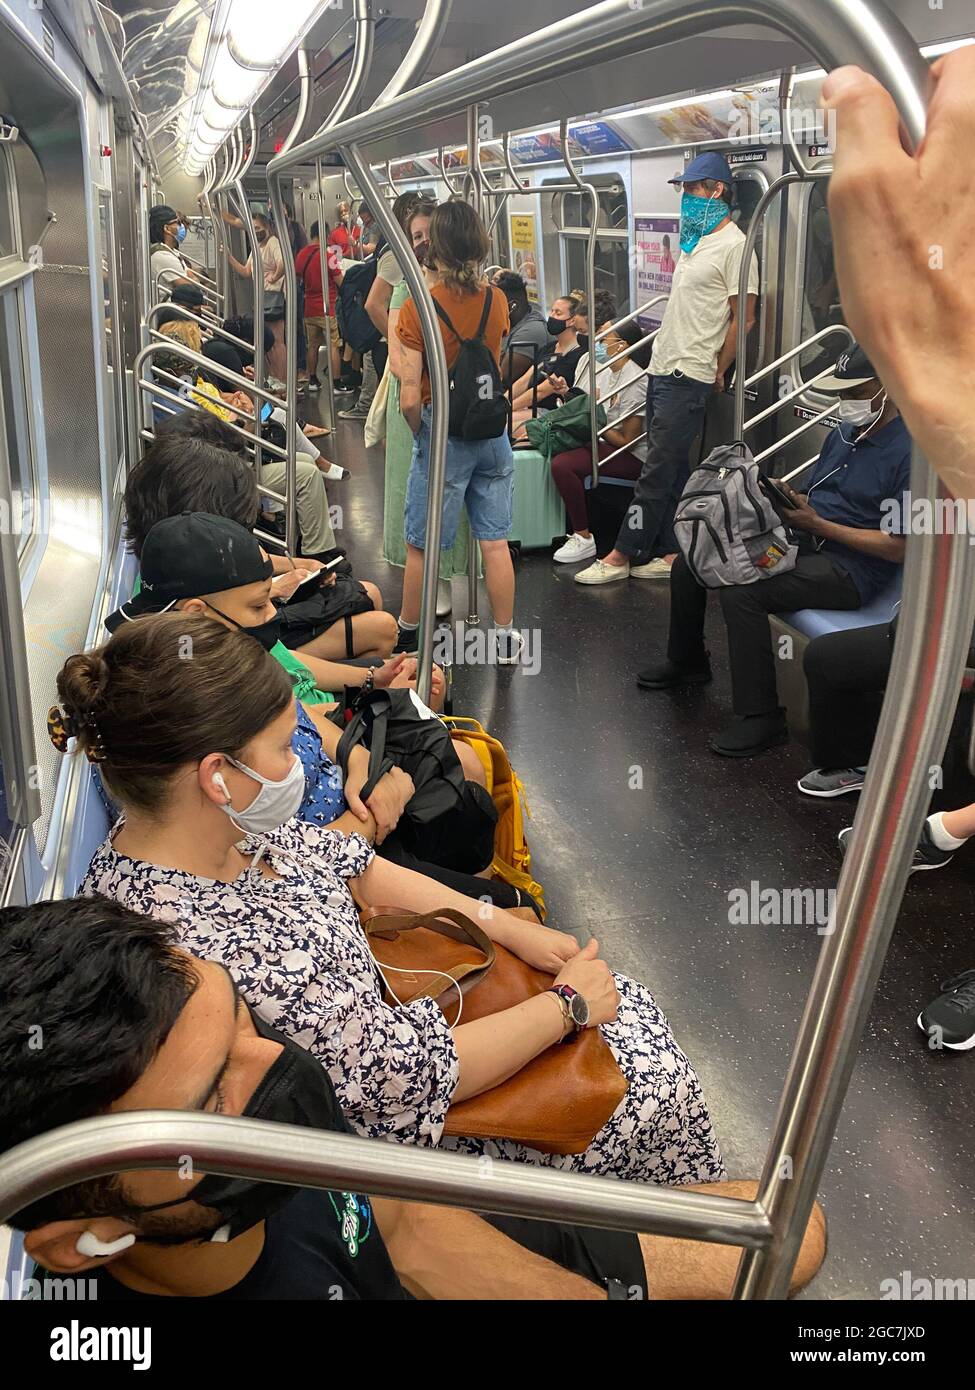 Masked commuters ride a New York City subway train in July 2021 when it was hoped the pandemic would be over but it seems to continue. People are tired of living on half breath. Stock Photo